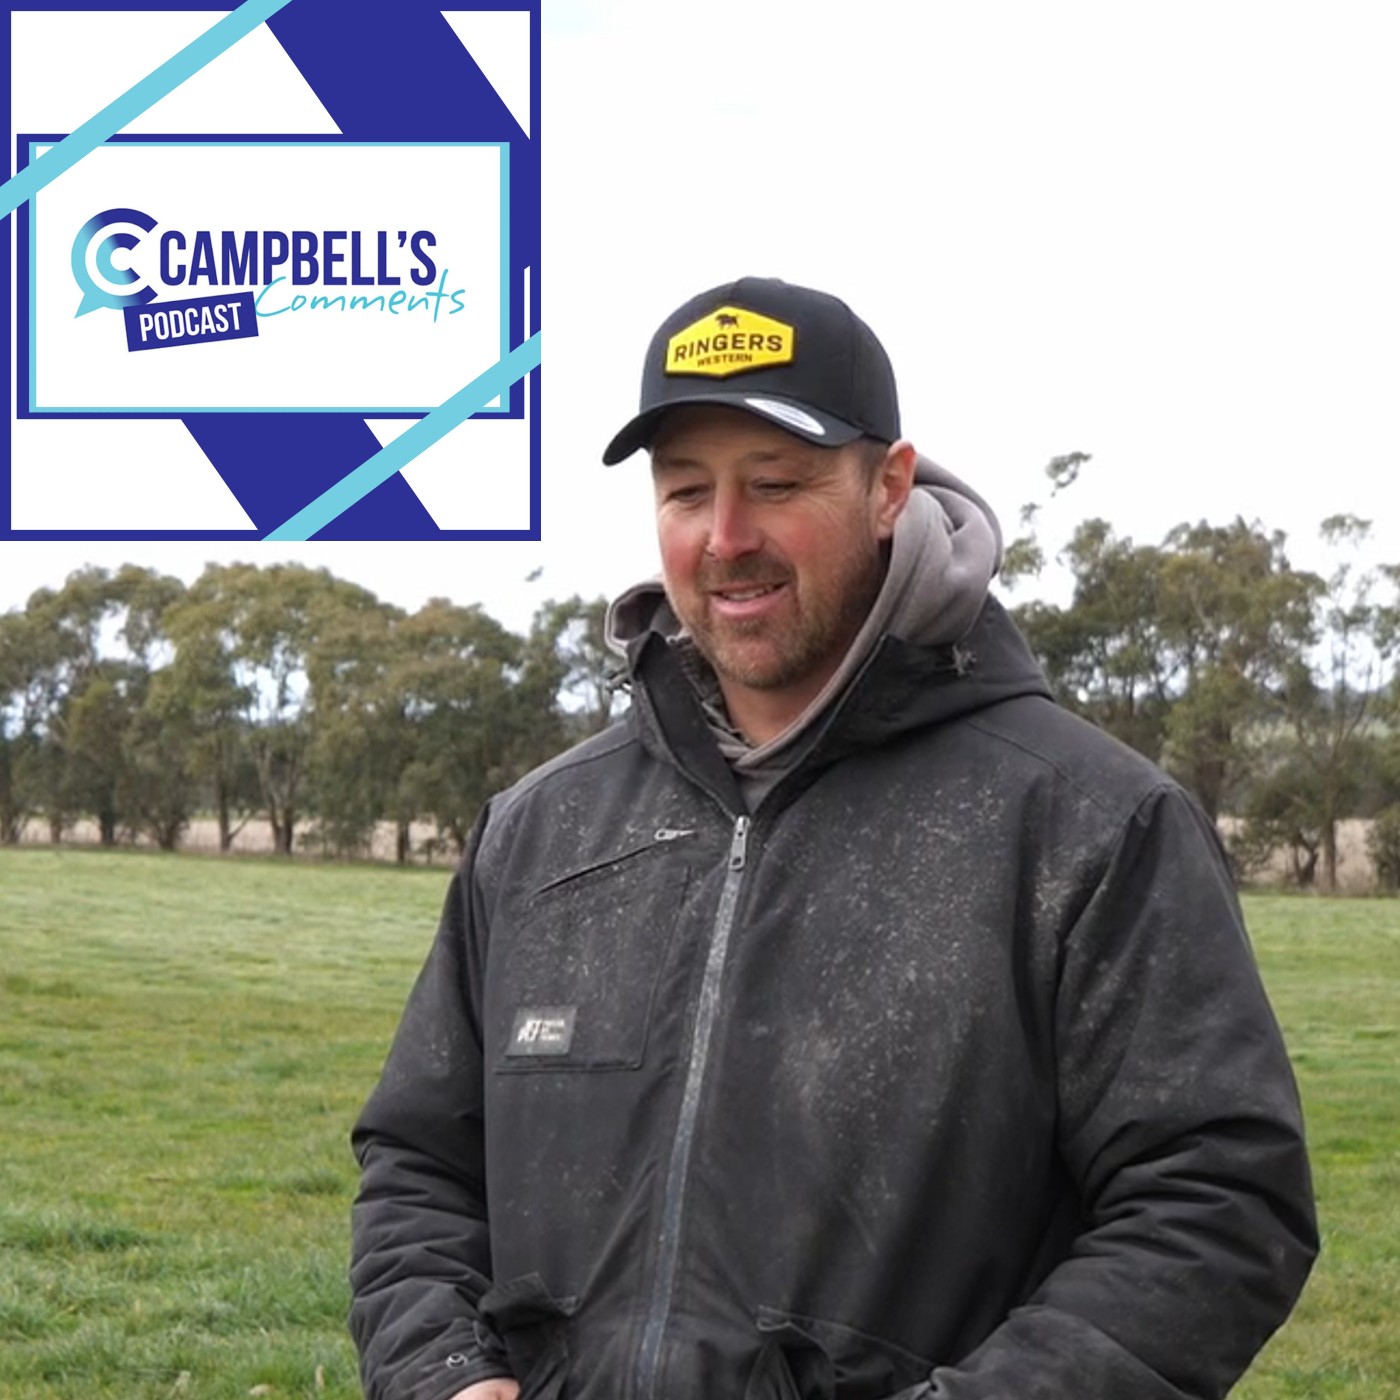 You are currently viewing 258: Campbells Comments with Clayton Tonkin